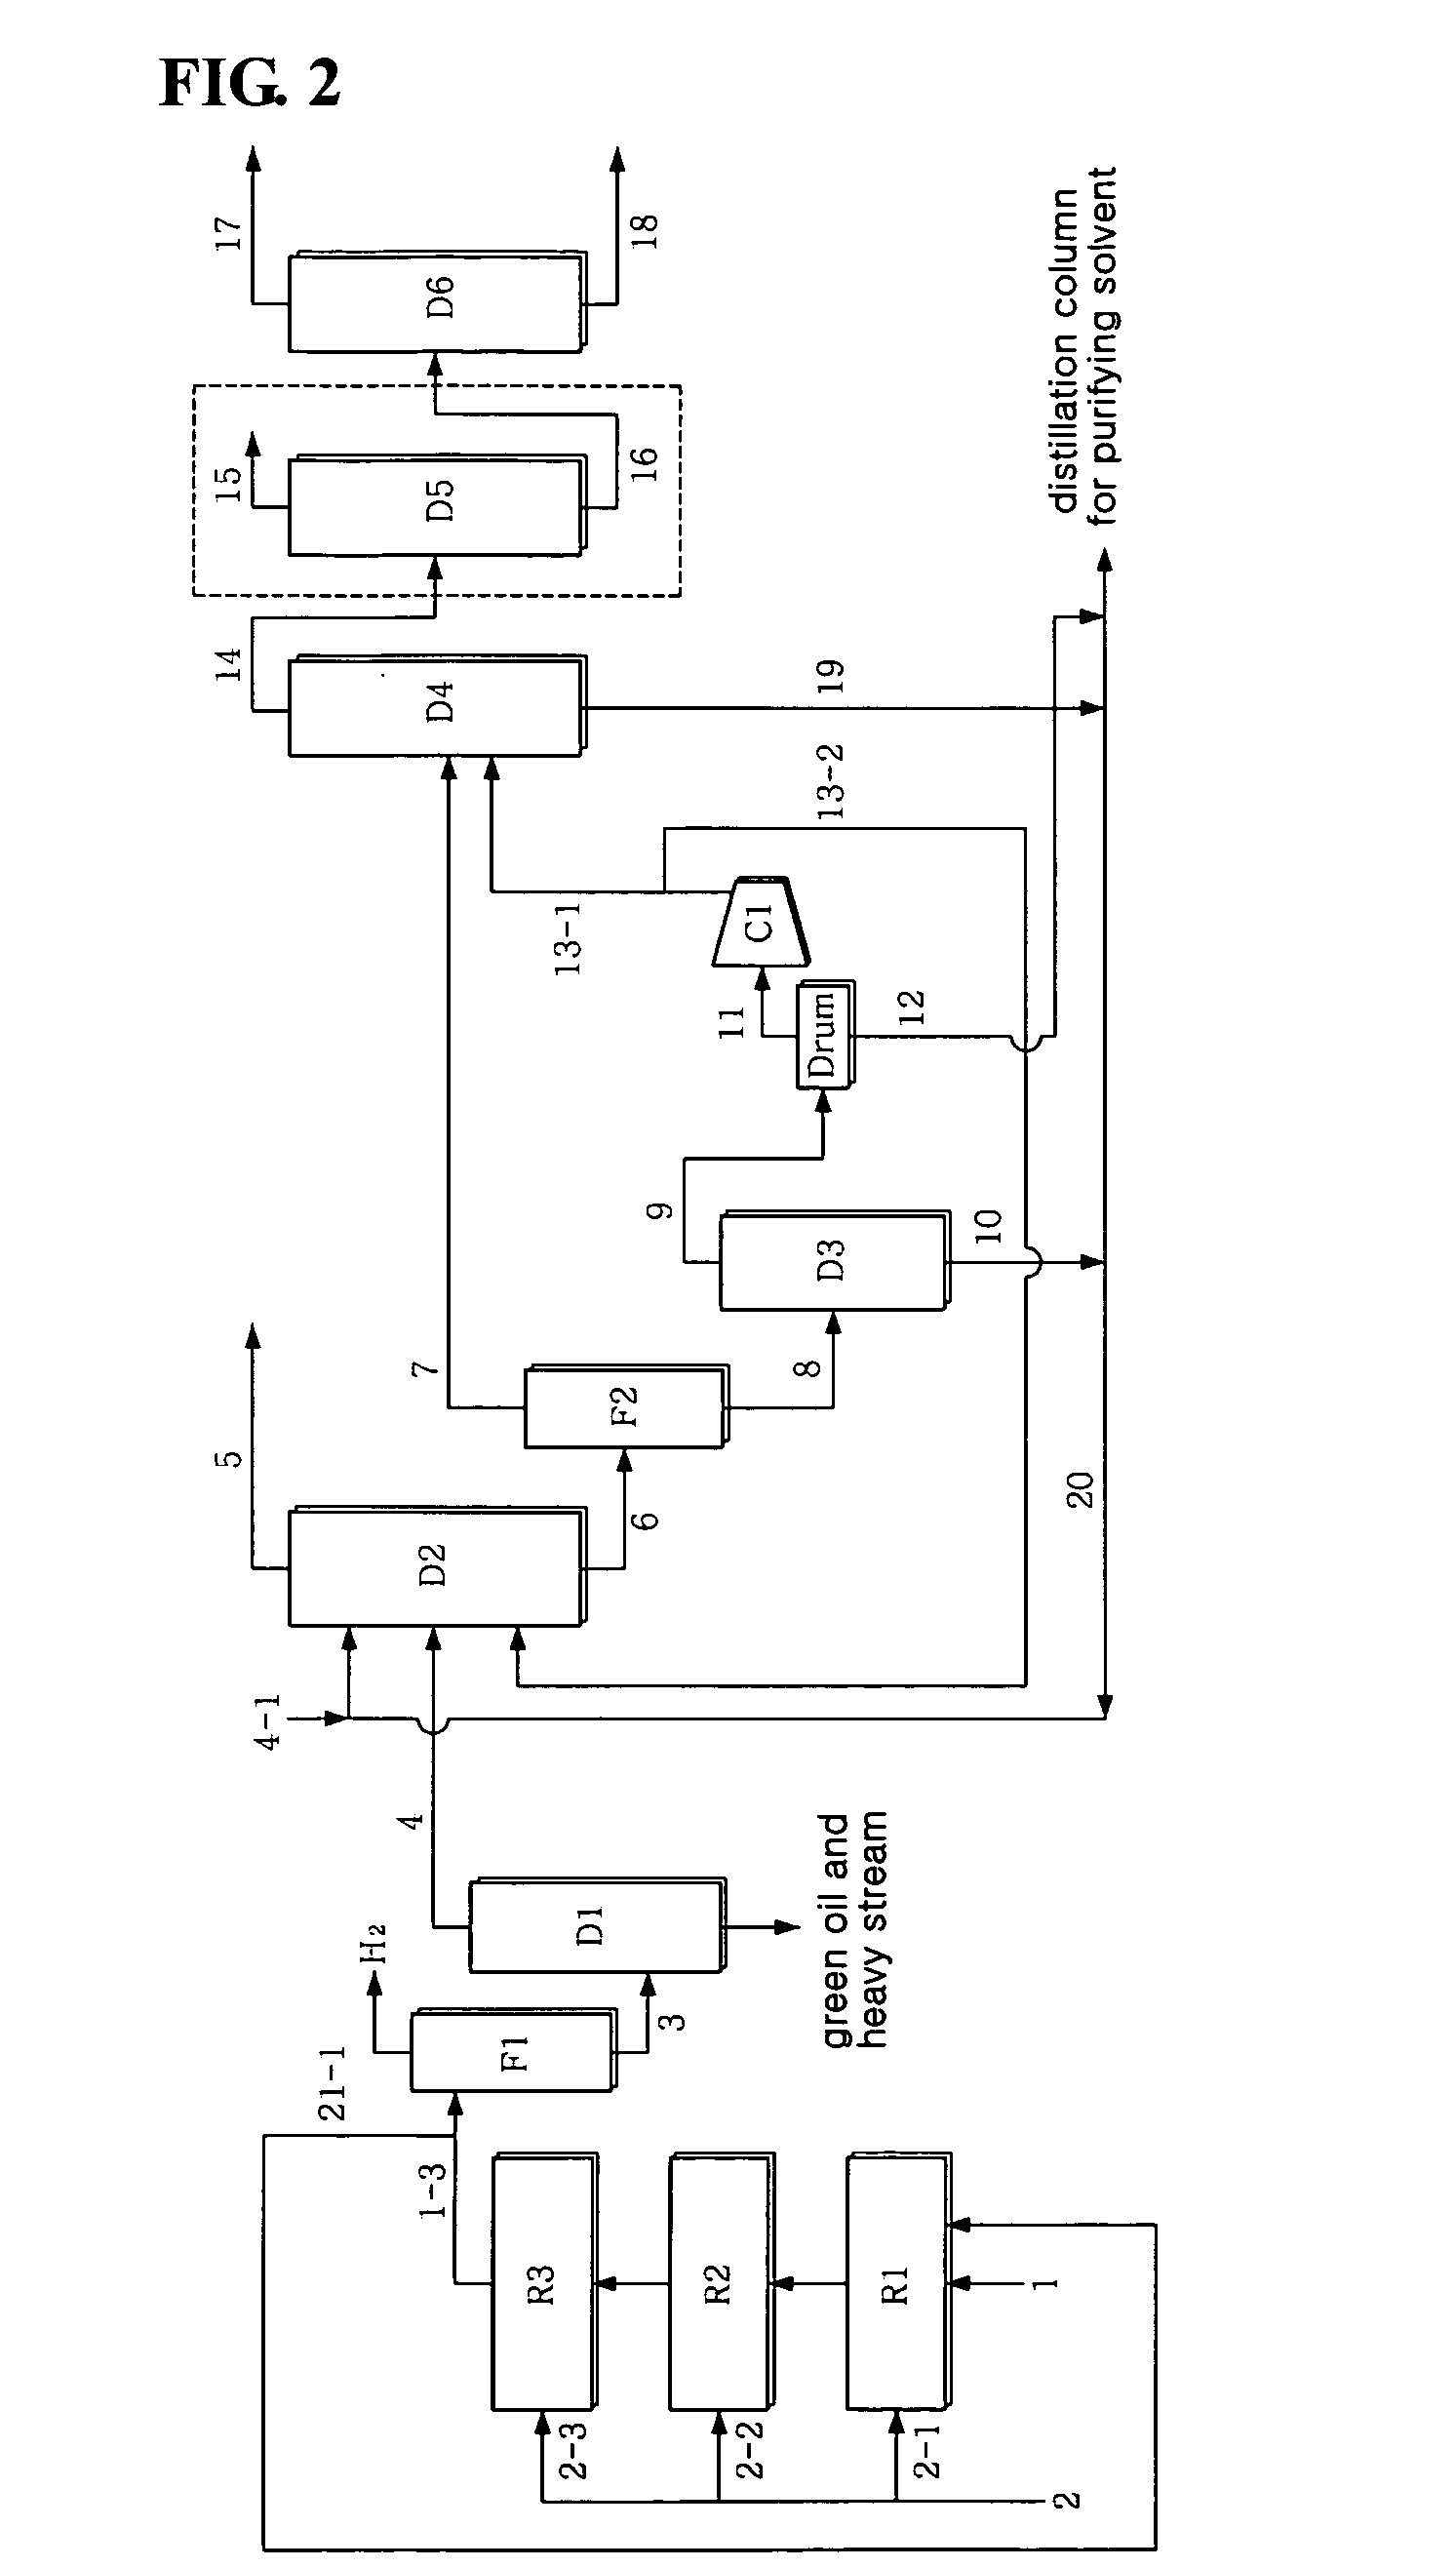 Process for 1,3-butadiene separation from a crude c4 stream with acetylene converter